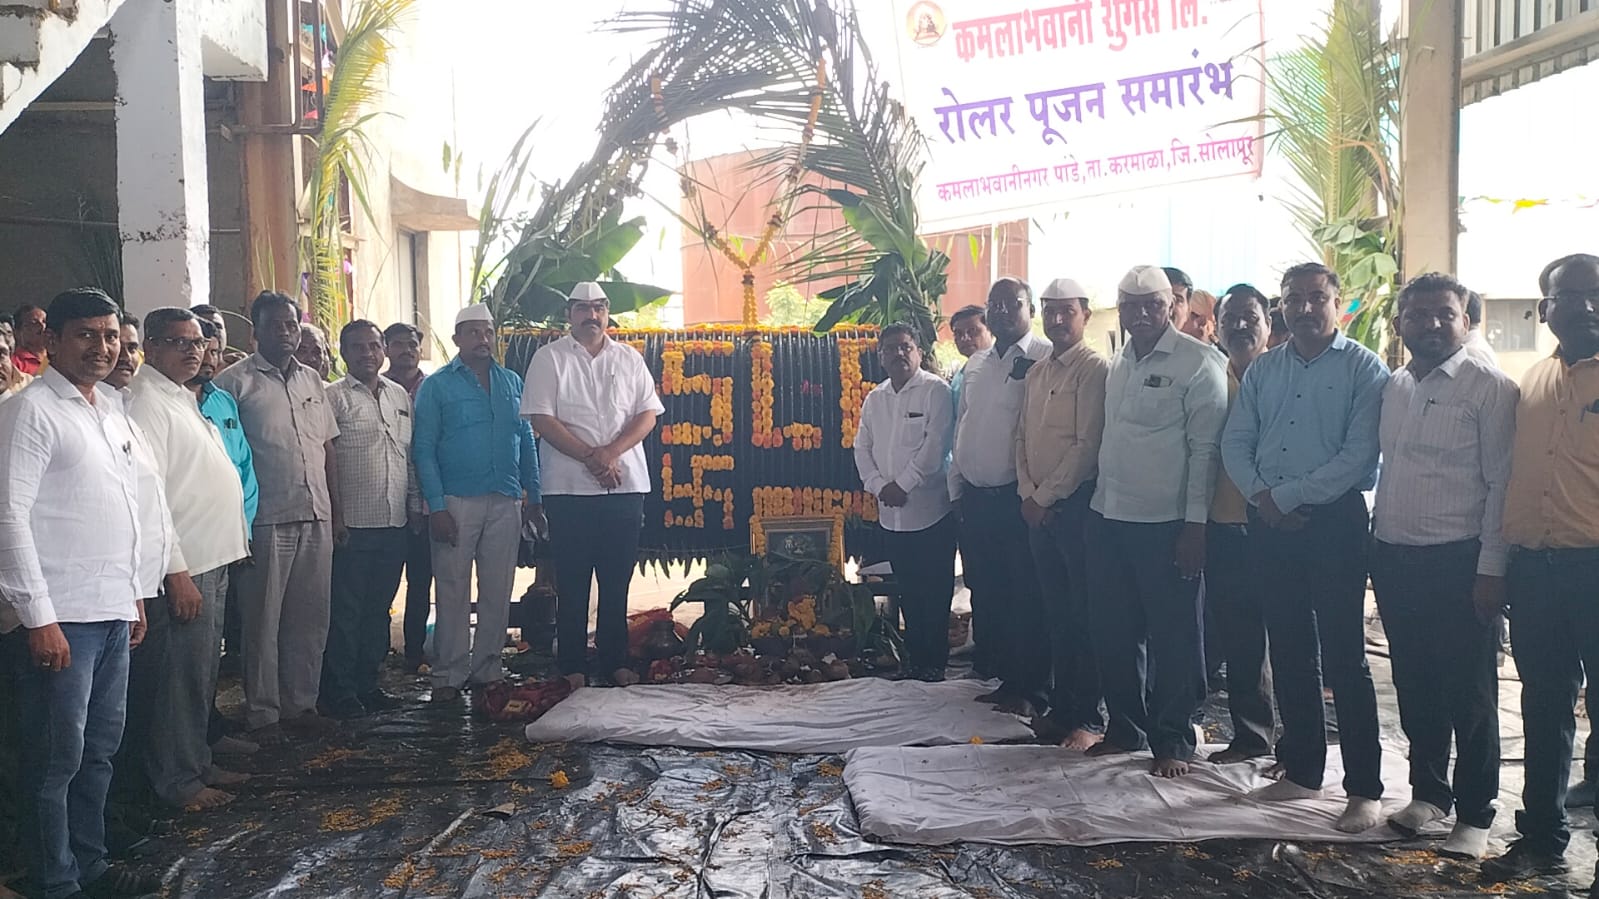 Kamalbhawani Sugar Factory Roller Pooja ceremony concluded